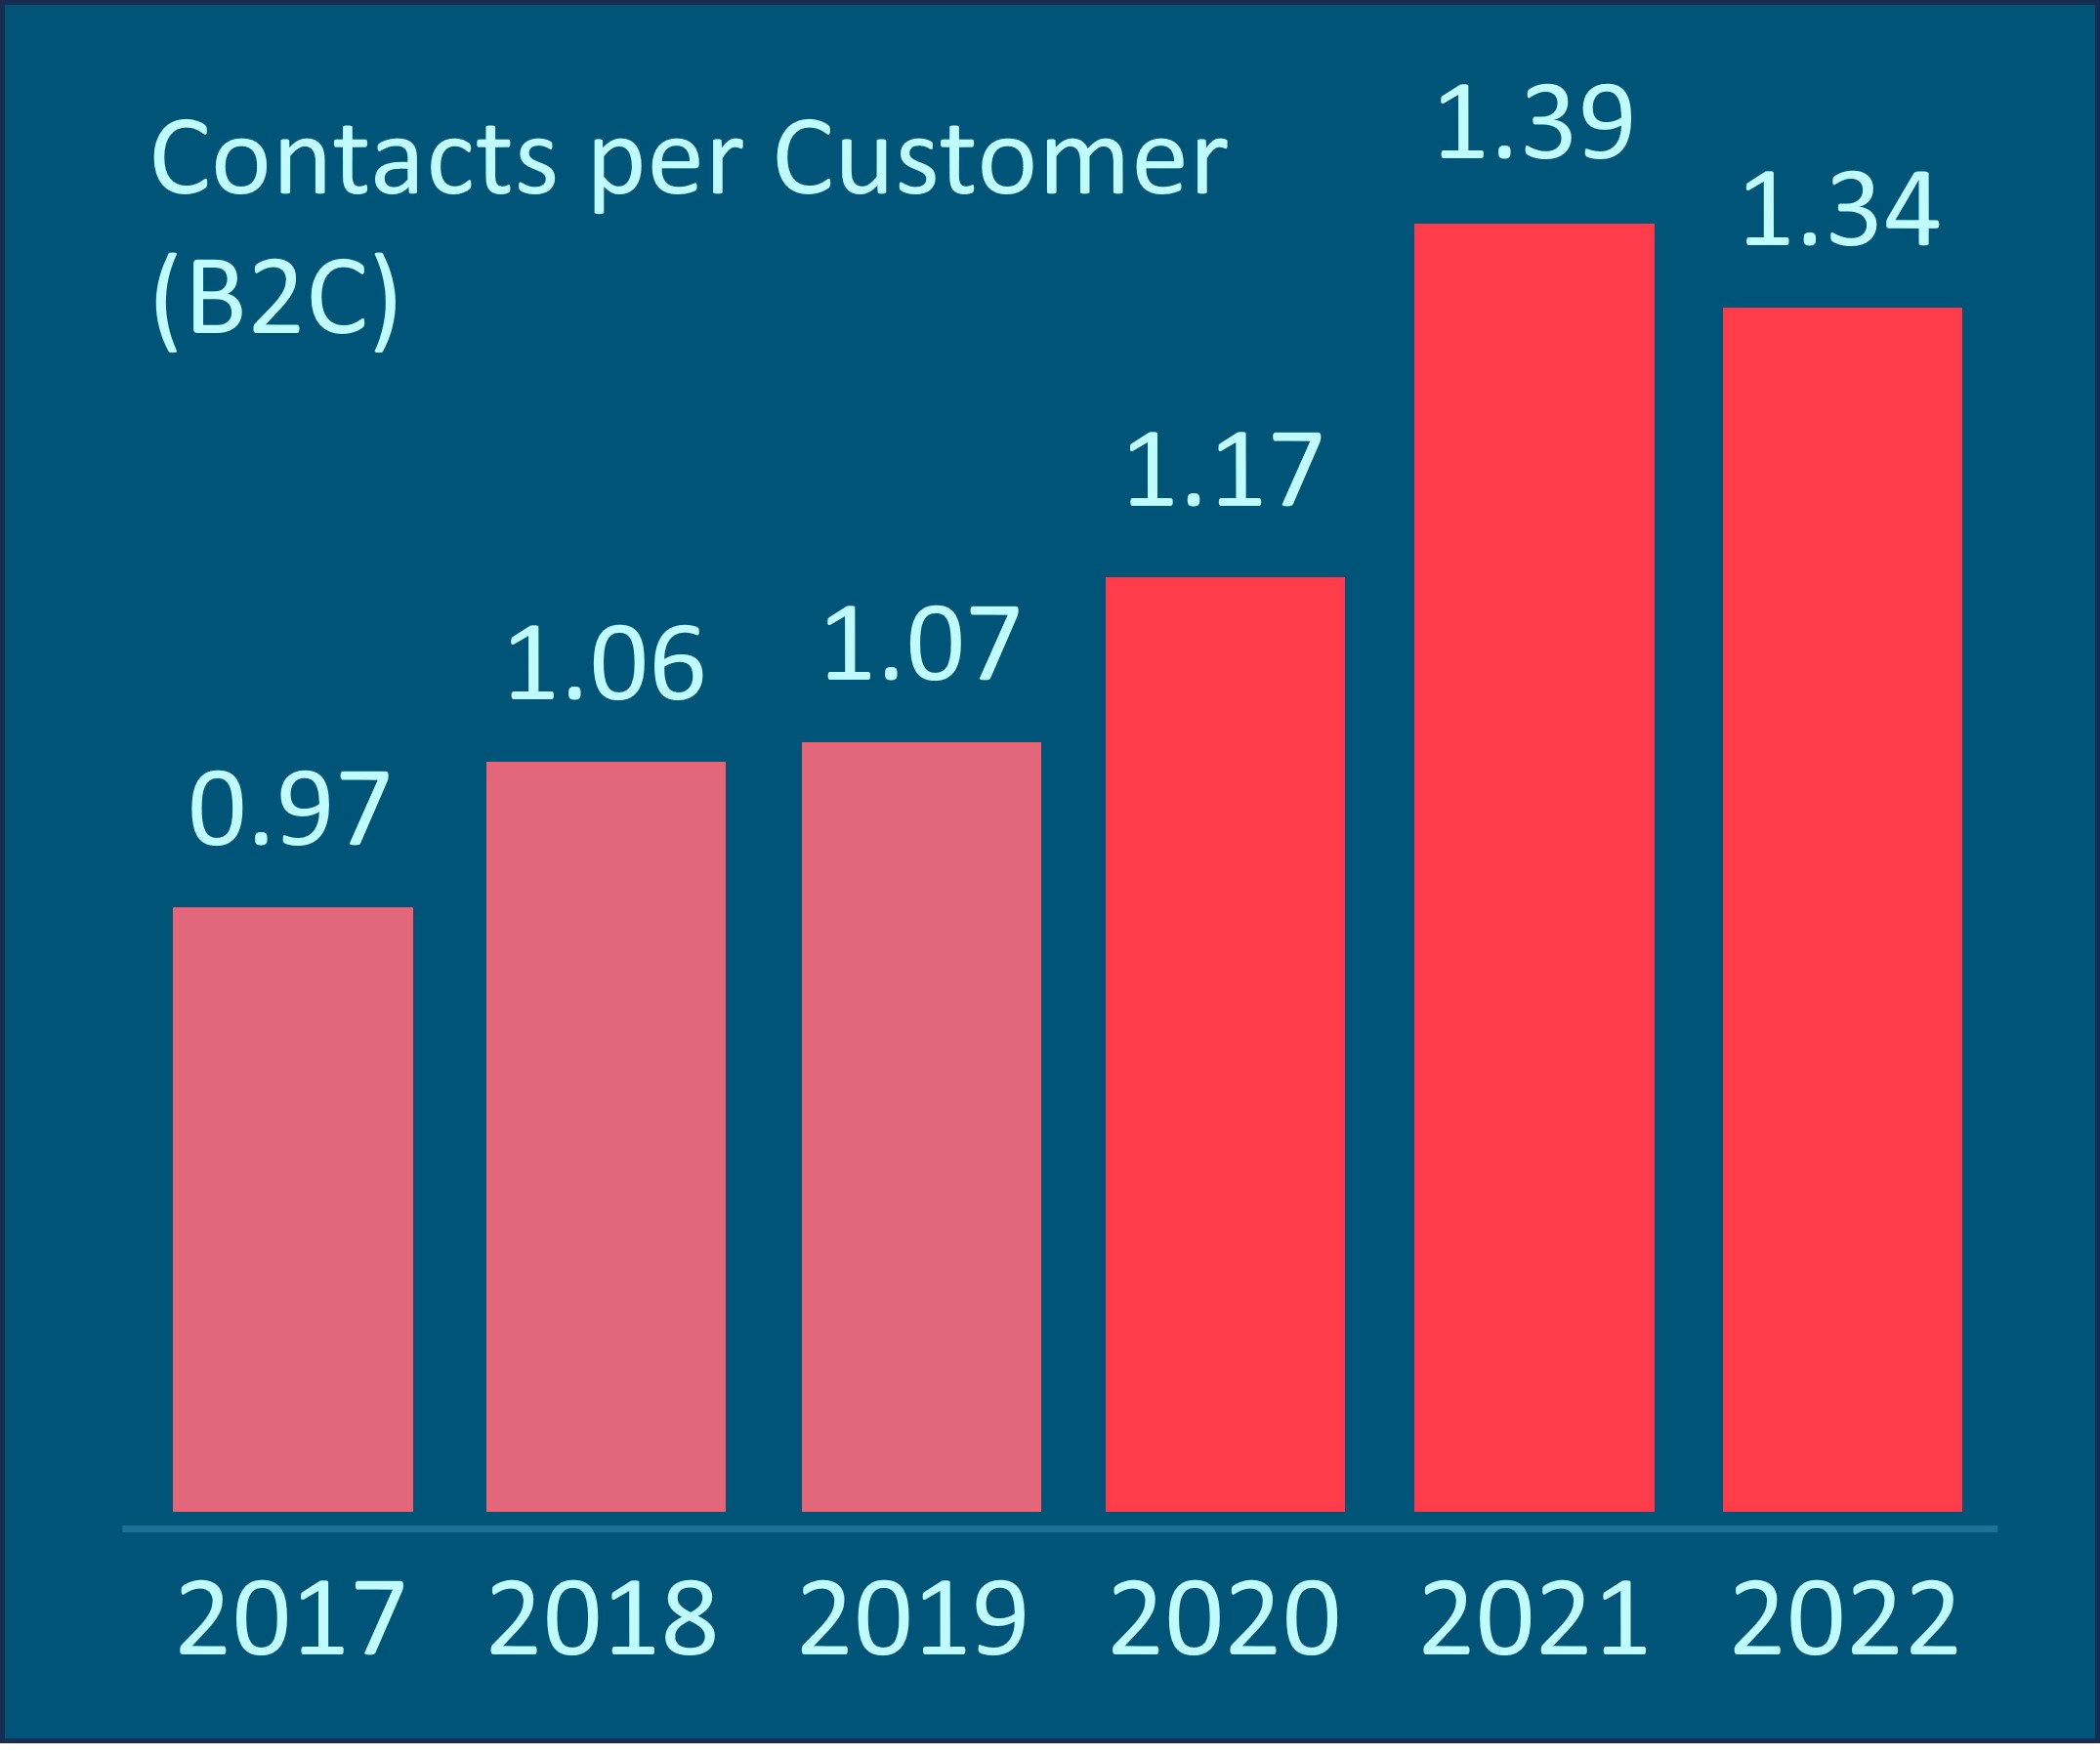 Bar chart shows the development of contacts per customer (B2C) from 2017 to 2022. In 2017, the ratio was 0.97. In 2021 and 2022, it was already 1.39 and 1.34.